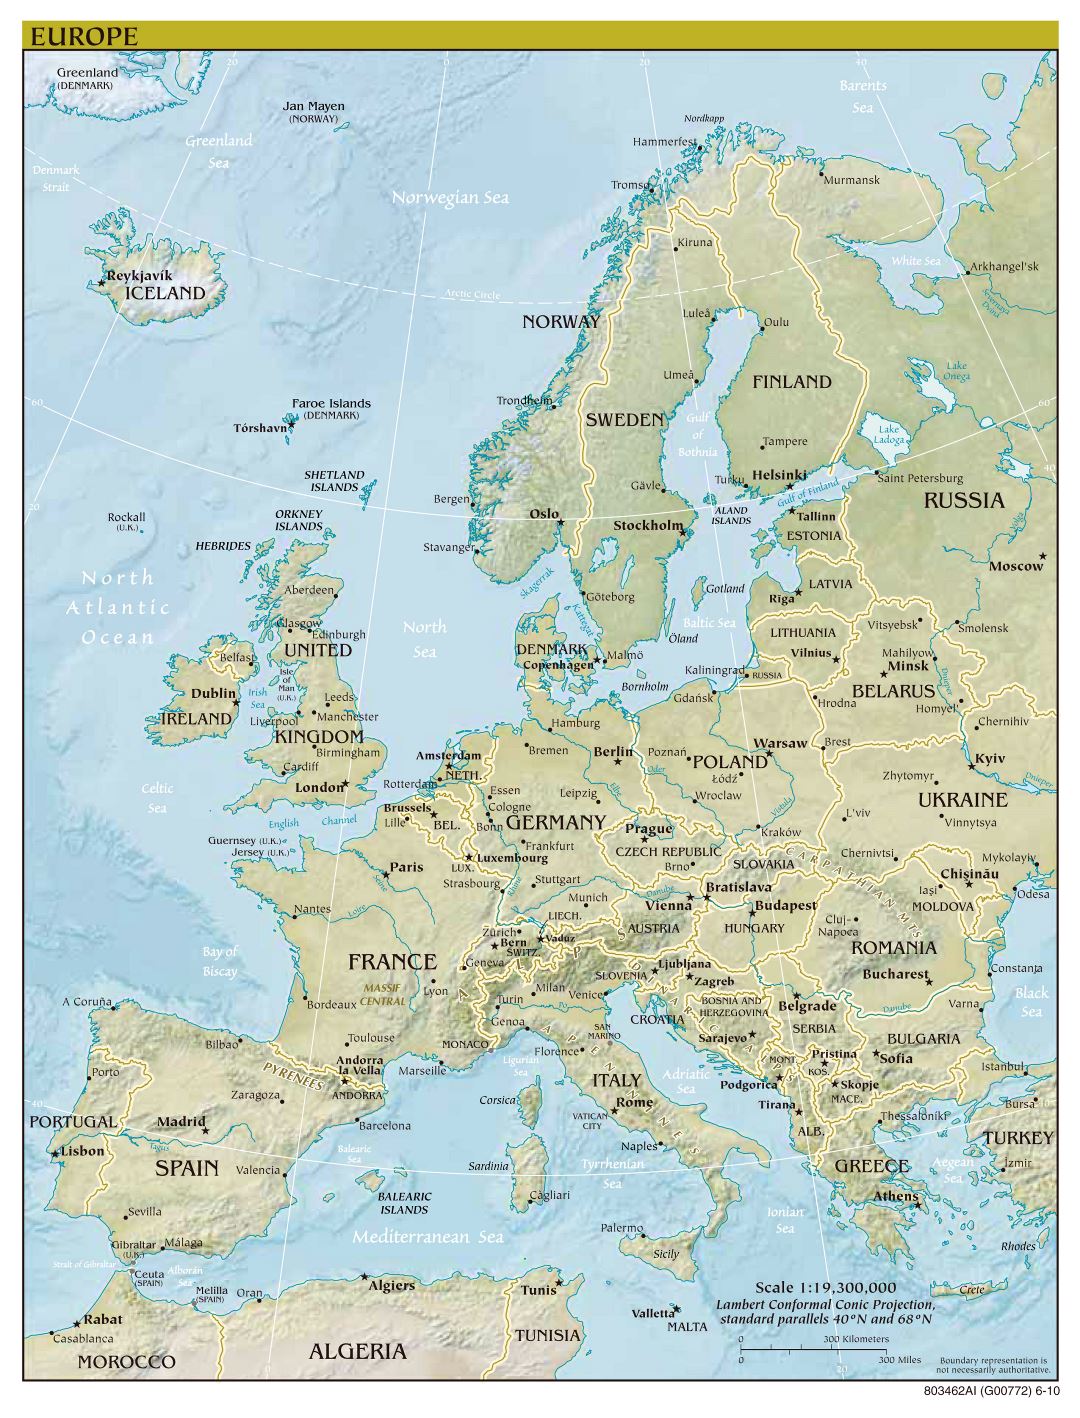 Large scale political map of Europe with relief, capitals and major cities - 2010